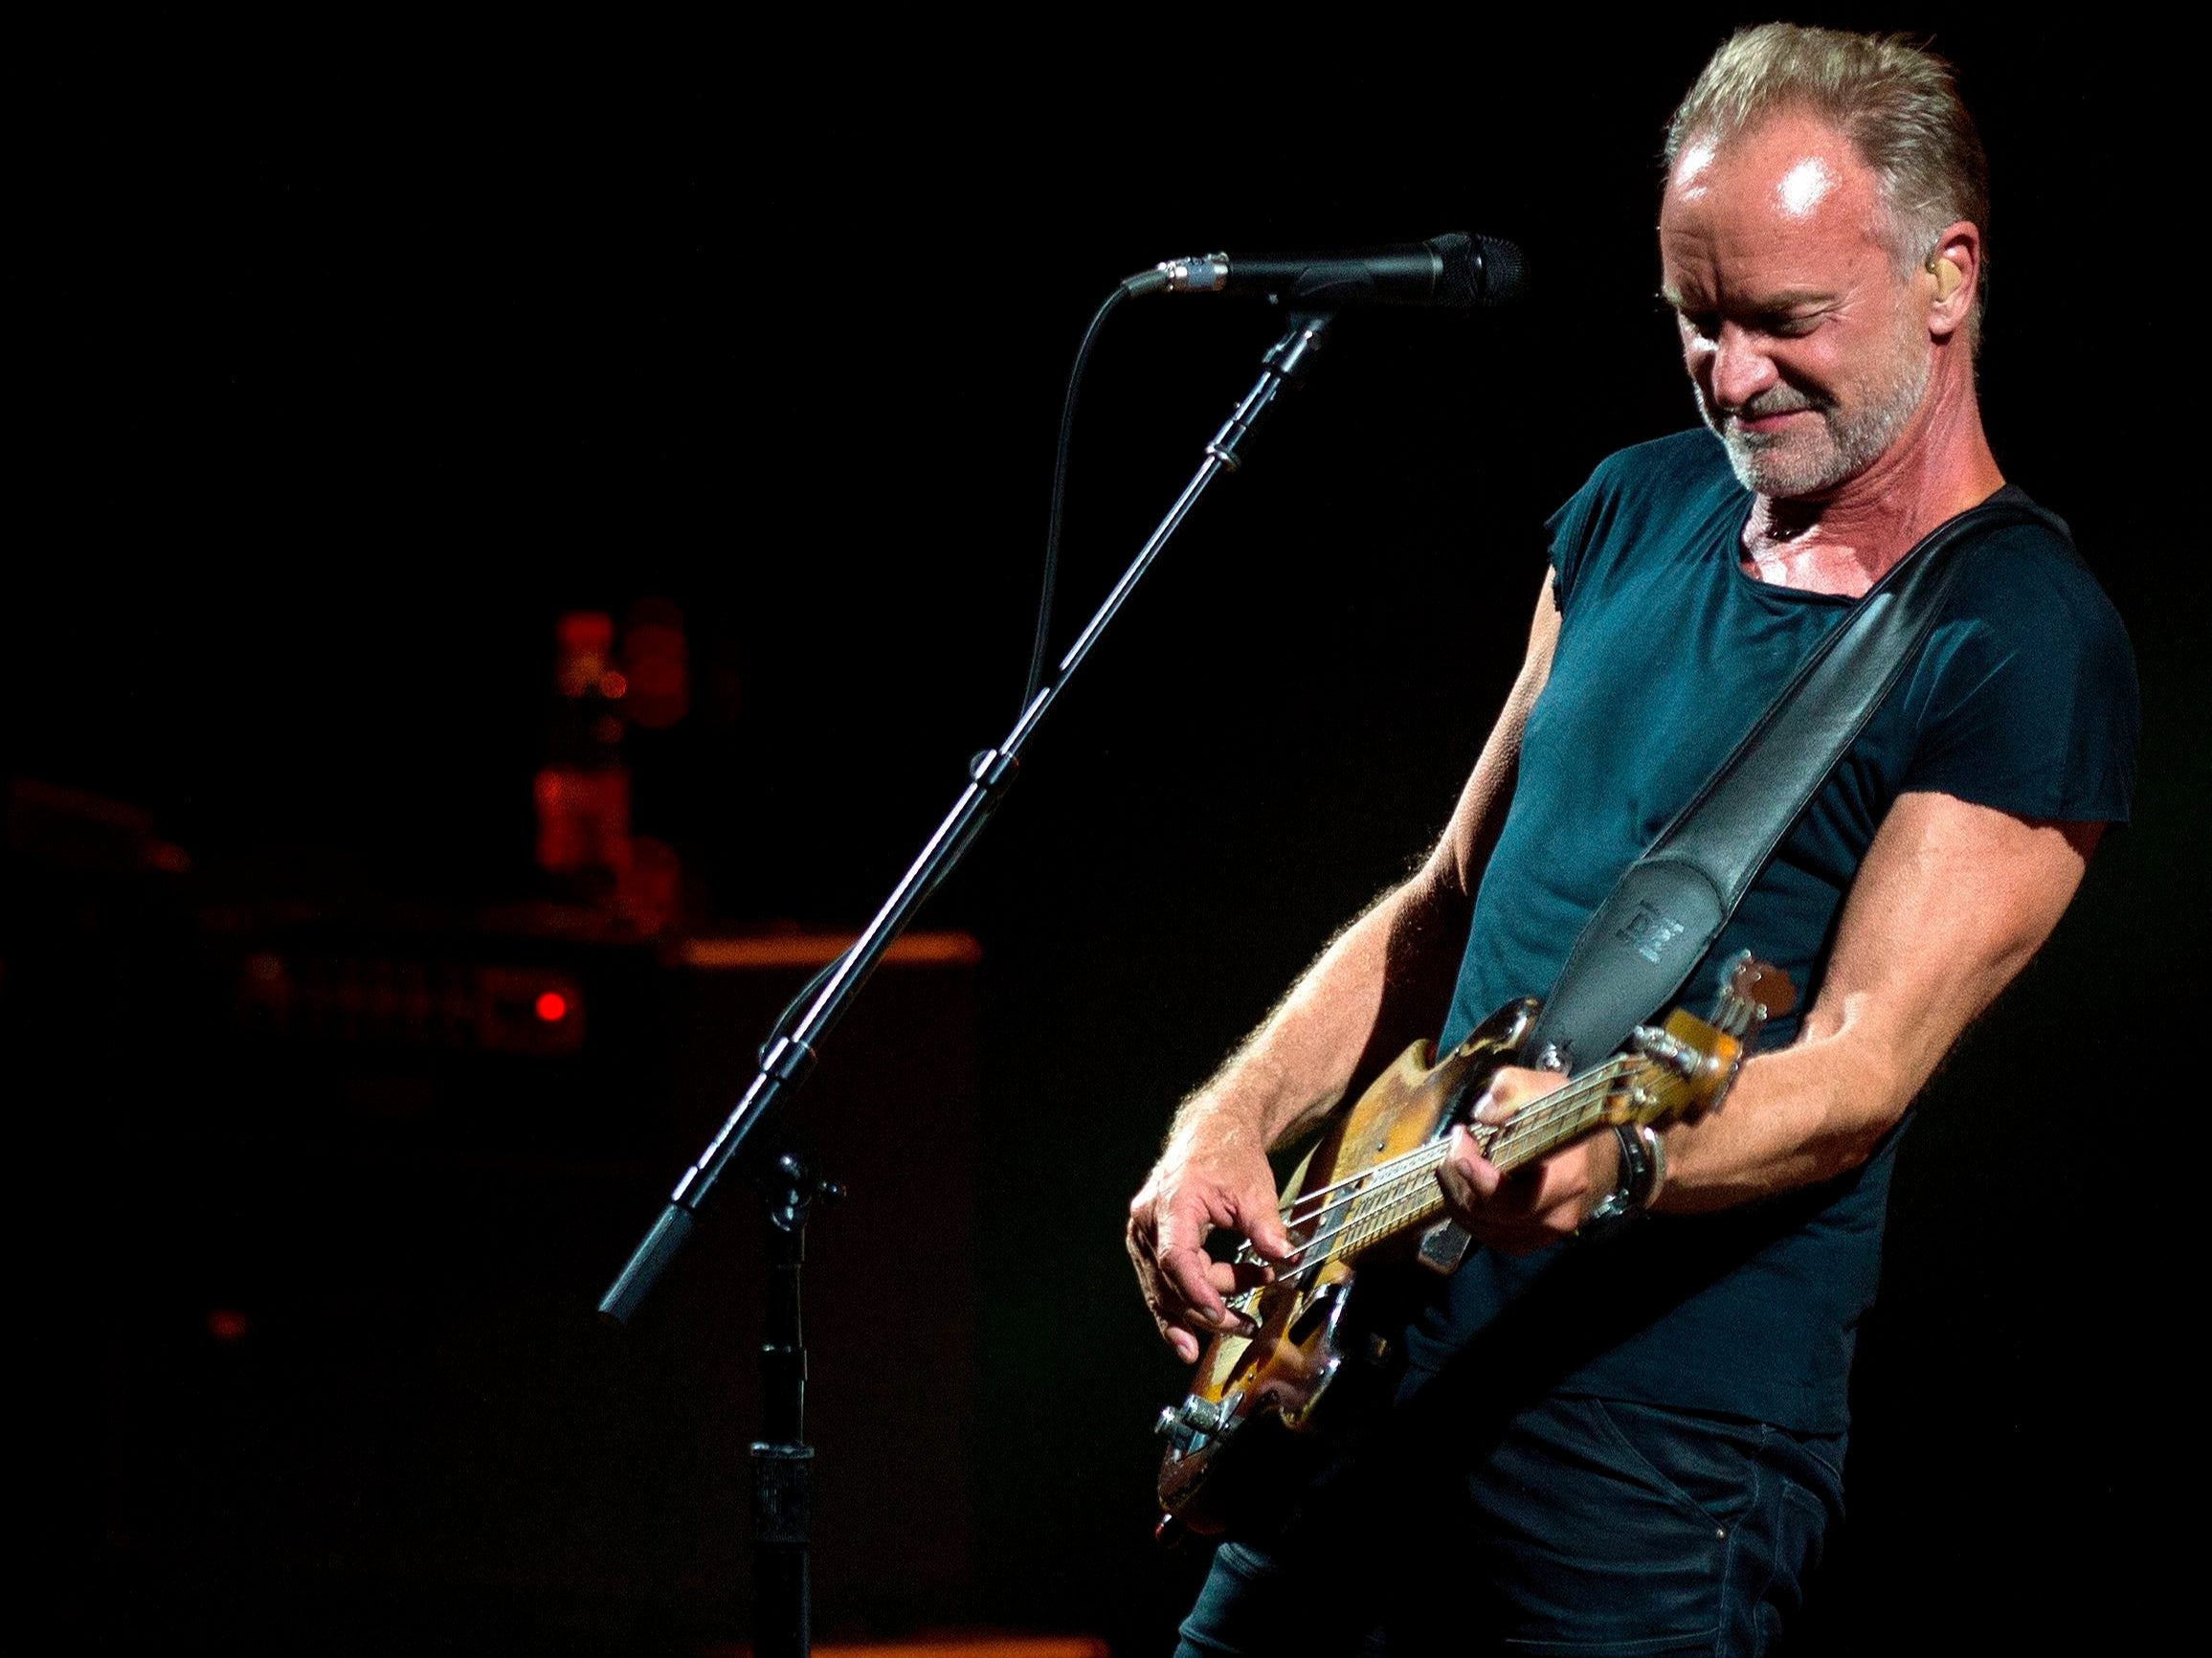 Sting review, Duets Compilation album is a generous reminder of The